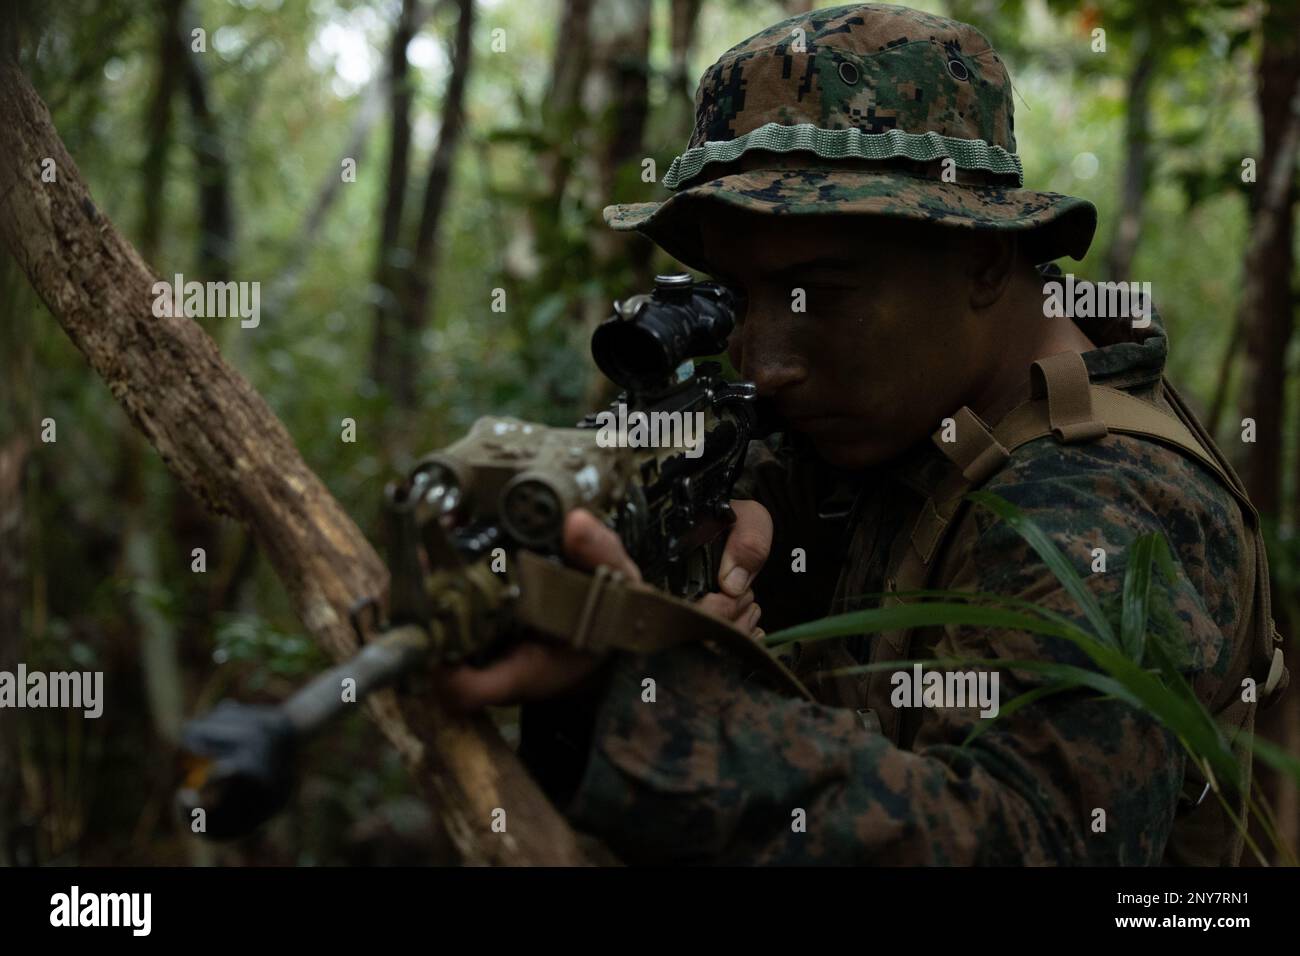 U.S. Marine Corps Lance Cpl. Kevin Lopez, a rifleman with 1st Battalion, 7th Marines, holds a defensive position during Jungle Warfare Exercise 23 in the Central Training Area on Okinawa, Japan, Feb. 14, 2023. JWX 23 is a large-scale field training exercise focused on leveraging the integrated capabilities of joint and allied partners to strengthen all-domain awareness, maneuver, and fires across a distributed maritime environment. Lopez is a native of Chicago, Illinois. Stock Photo